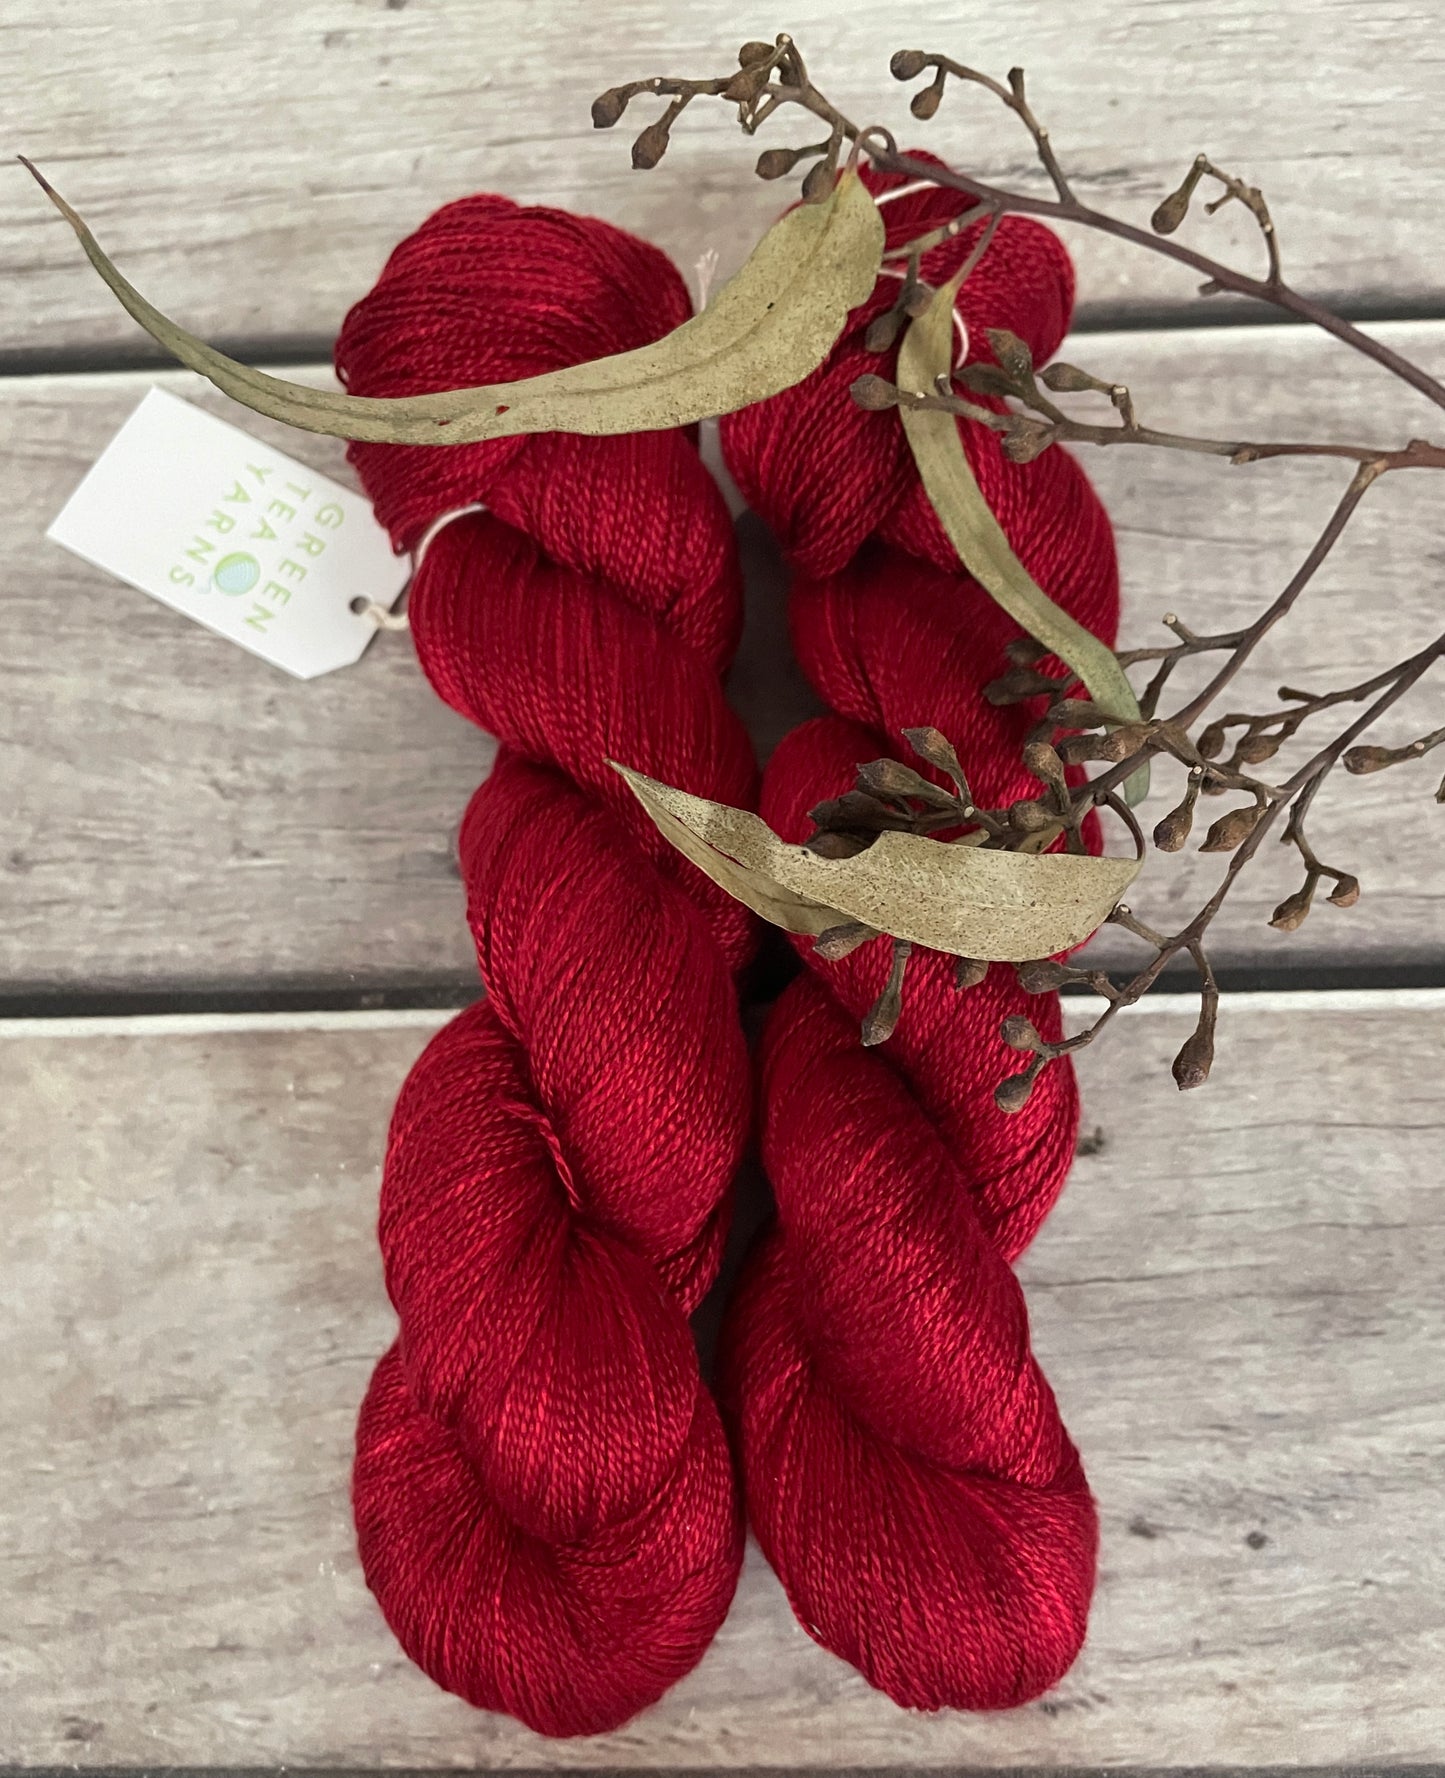 Dark Lacquer red - 3 ply in Mulberry silk - Ginseng hl